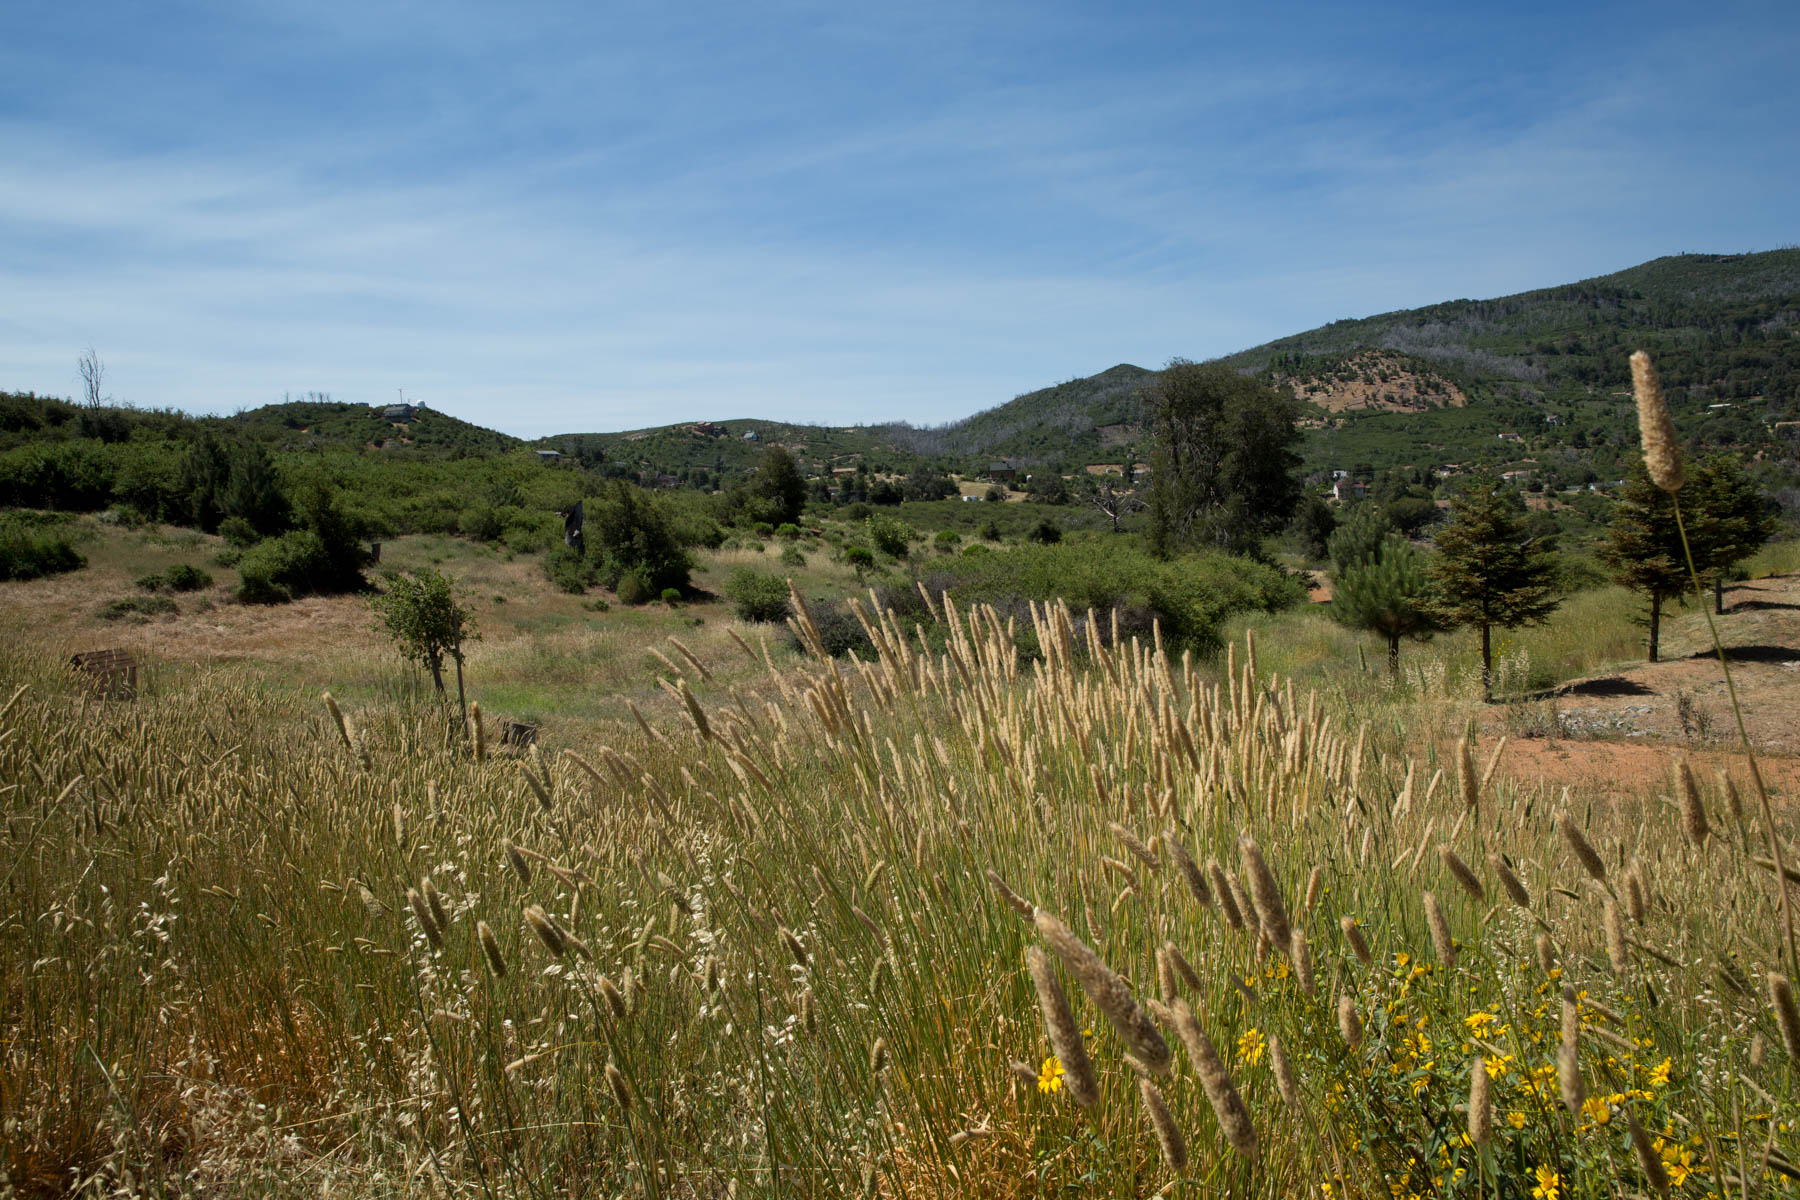 View of hills and cattails